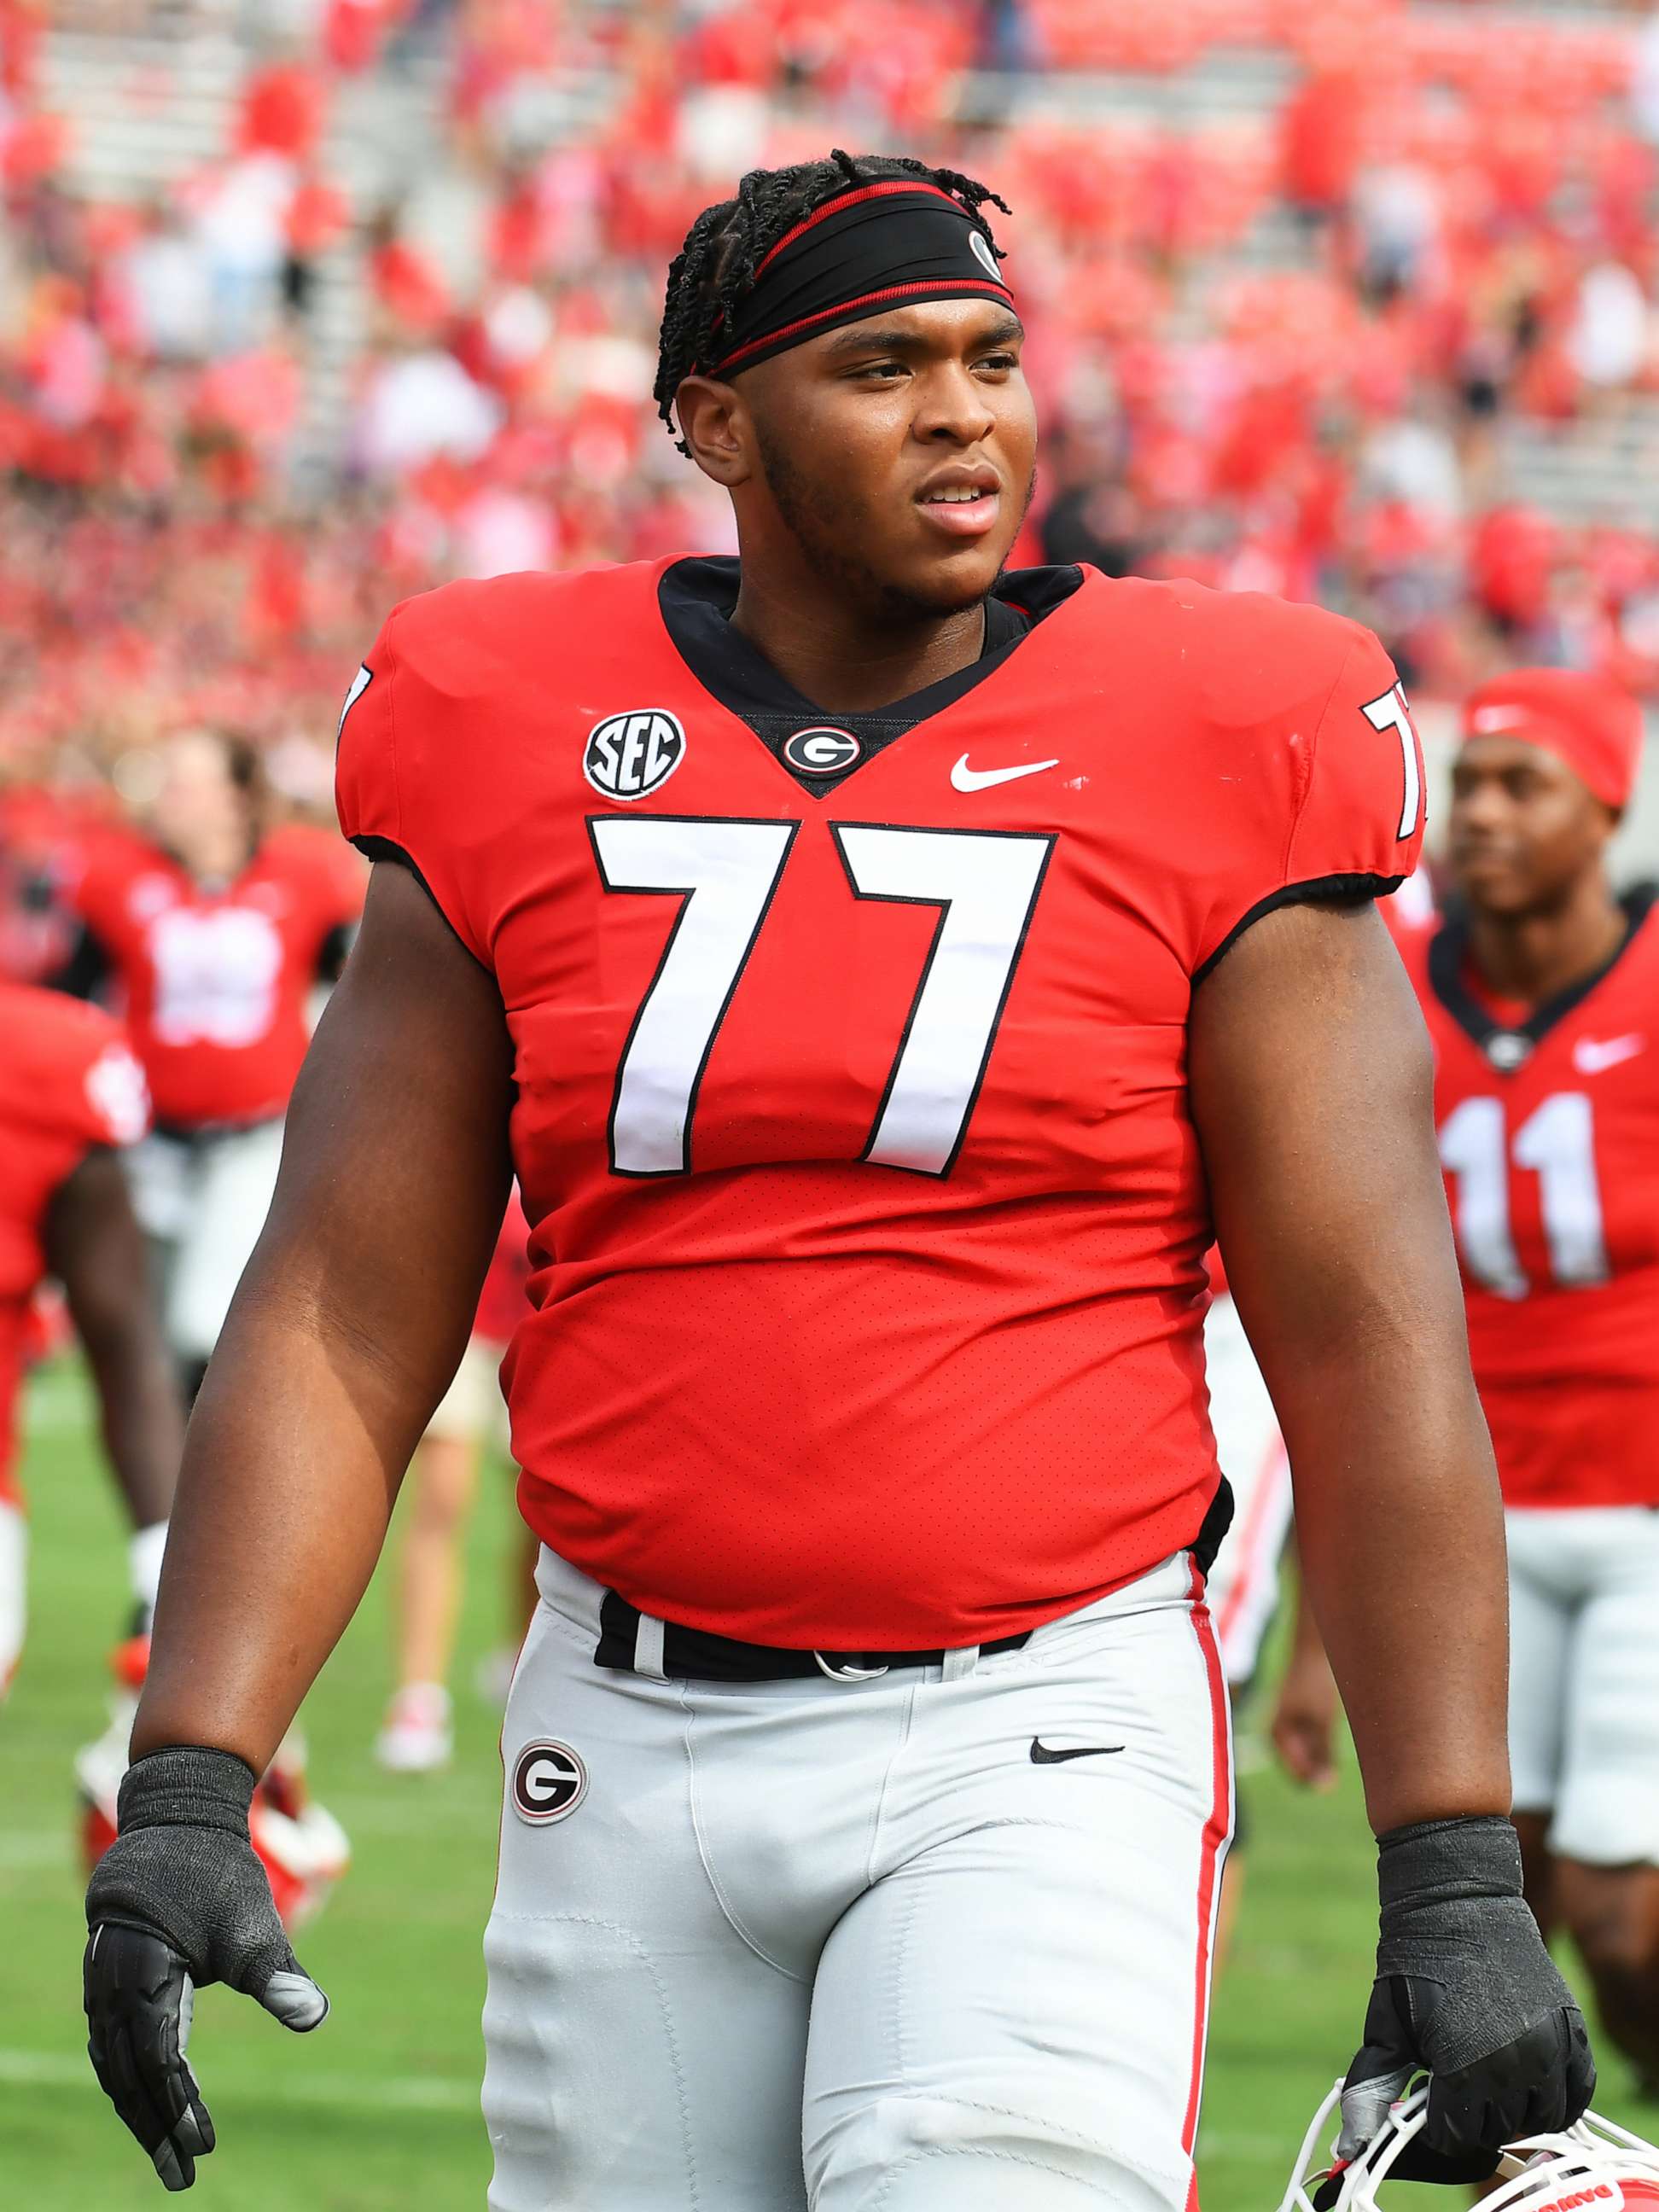 PHOTO: Georgia Bulldogs Offensive Linemen Devin Willock (77) after the college football game between the Arkansas Razorbacks and the Georgia Bulldogs on Oct. 02, 2021, at Sanford Stadium in Athens, Ga.